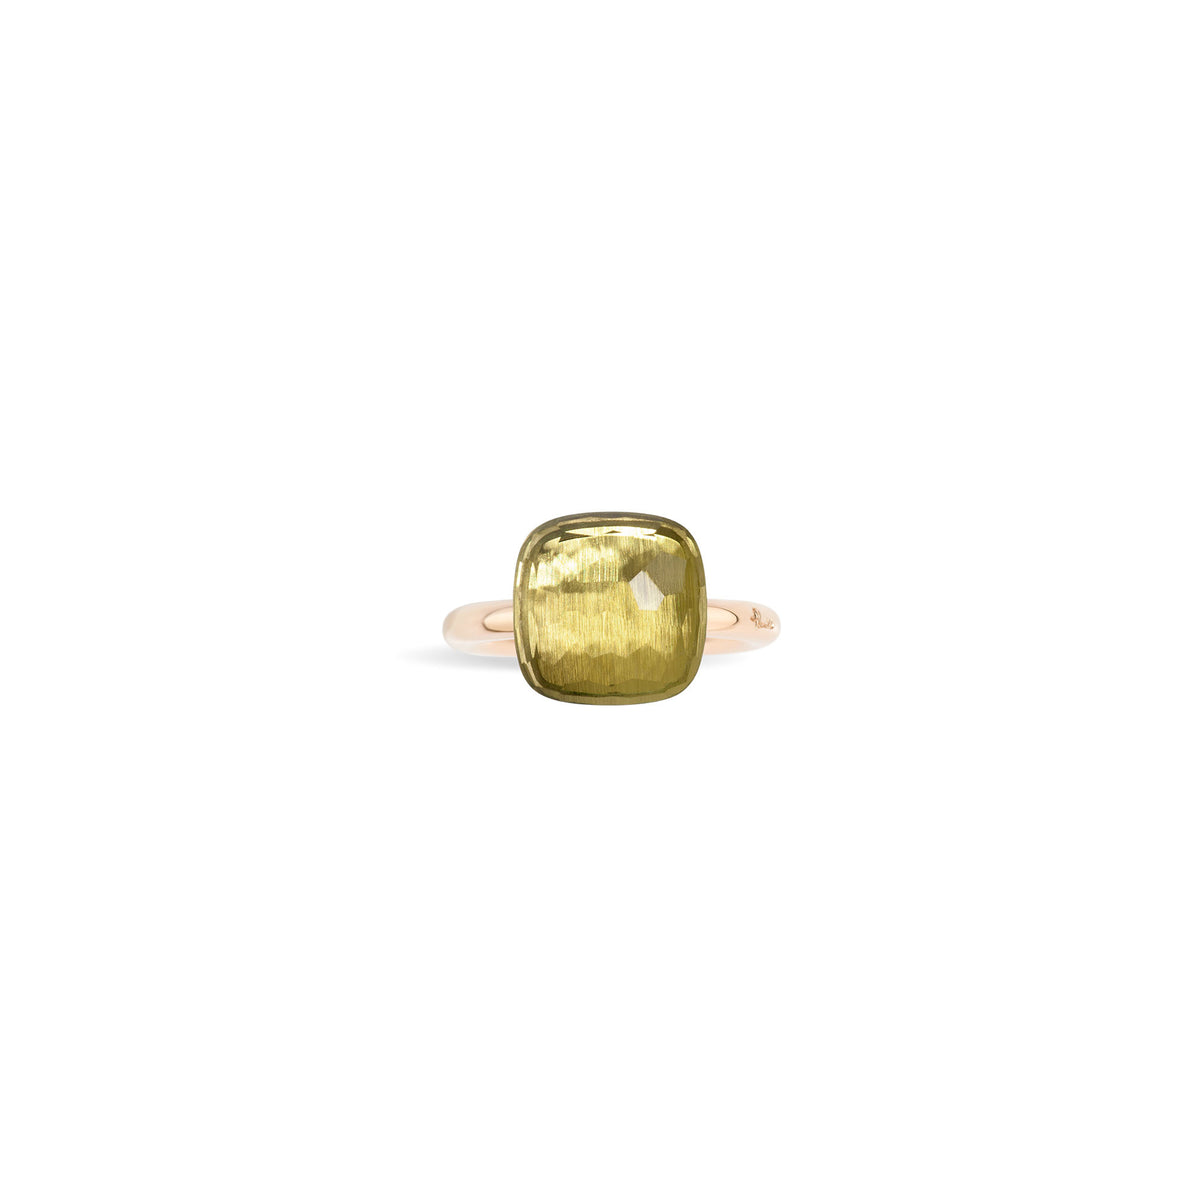 Nudo Maxi Ring in 18k Rose Gold and White Gold with Lemon Quartz - Orsini Jewellers NZ